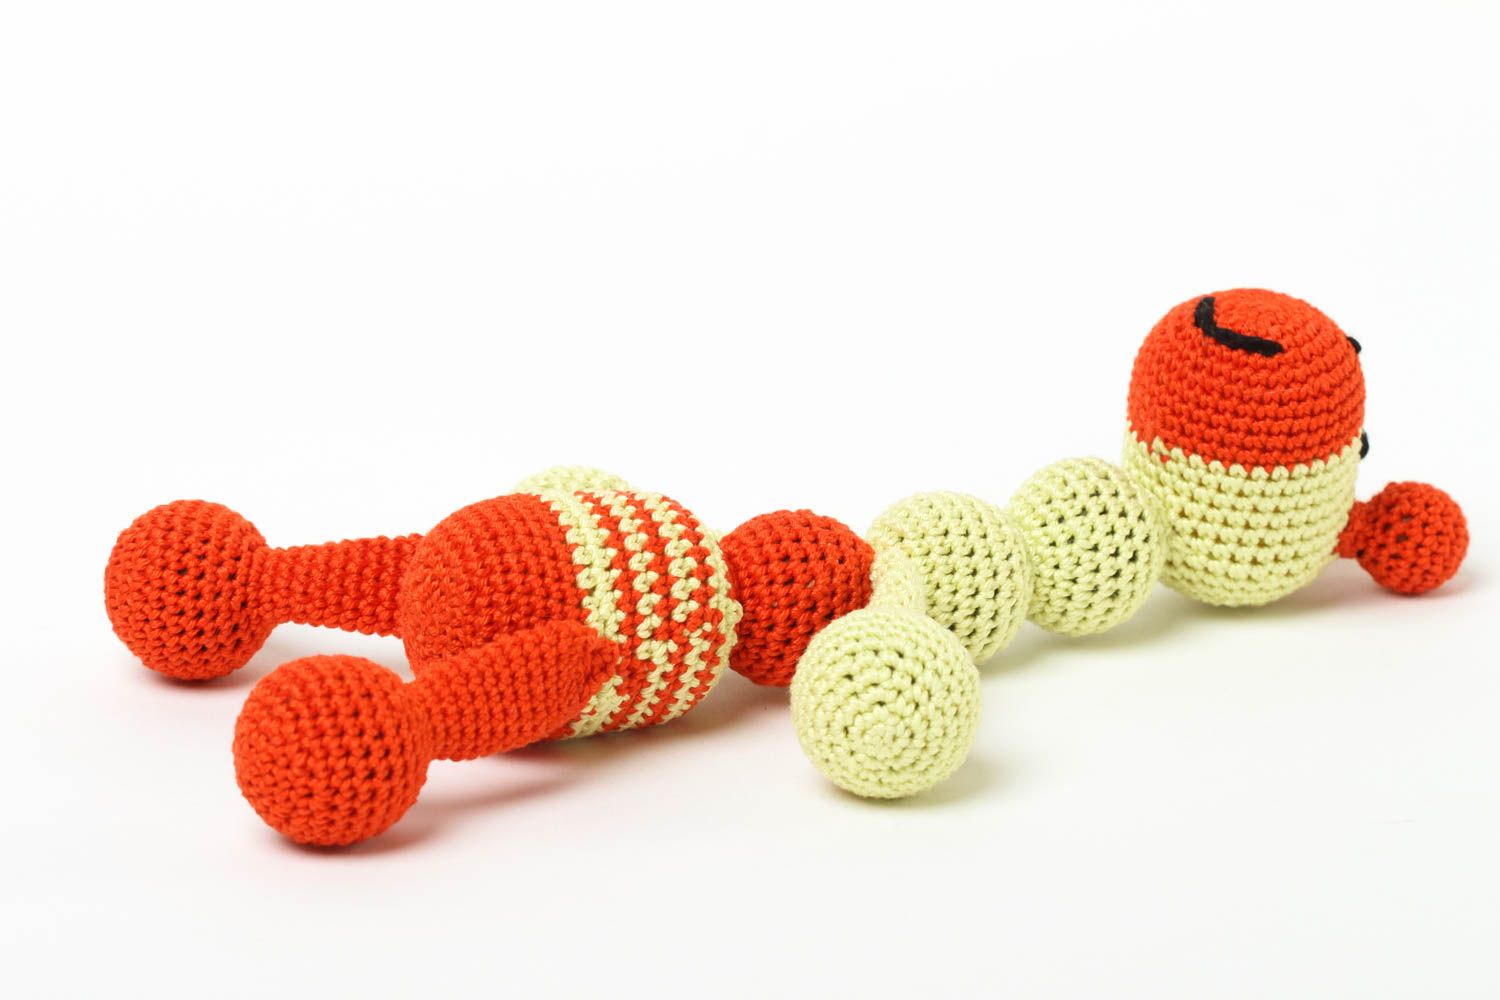 Handmade rattle crocheted soft toys for babies toy or new born babies photo 2